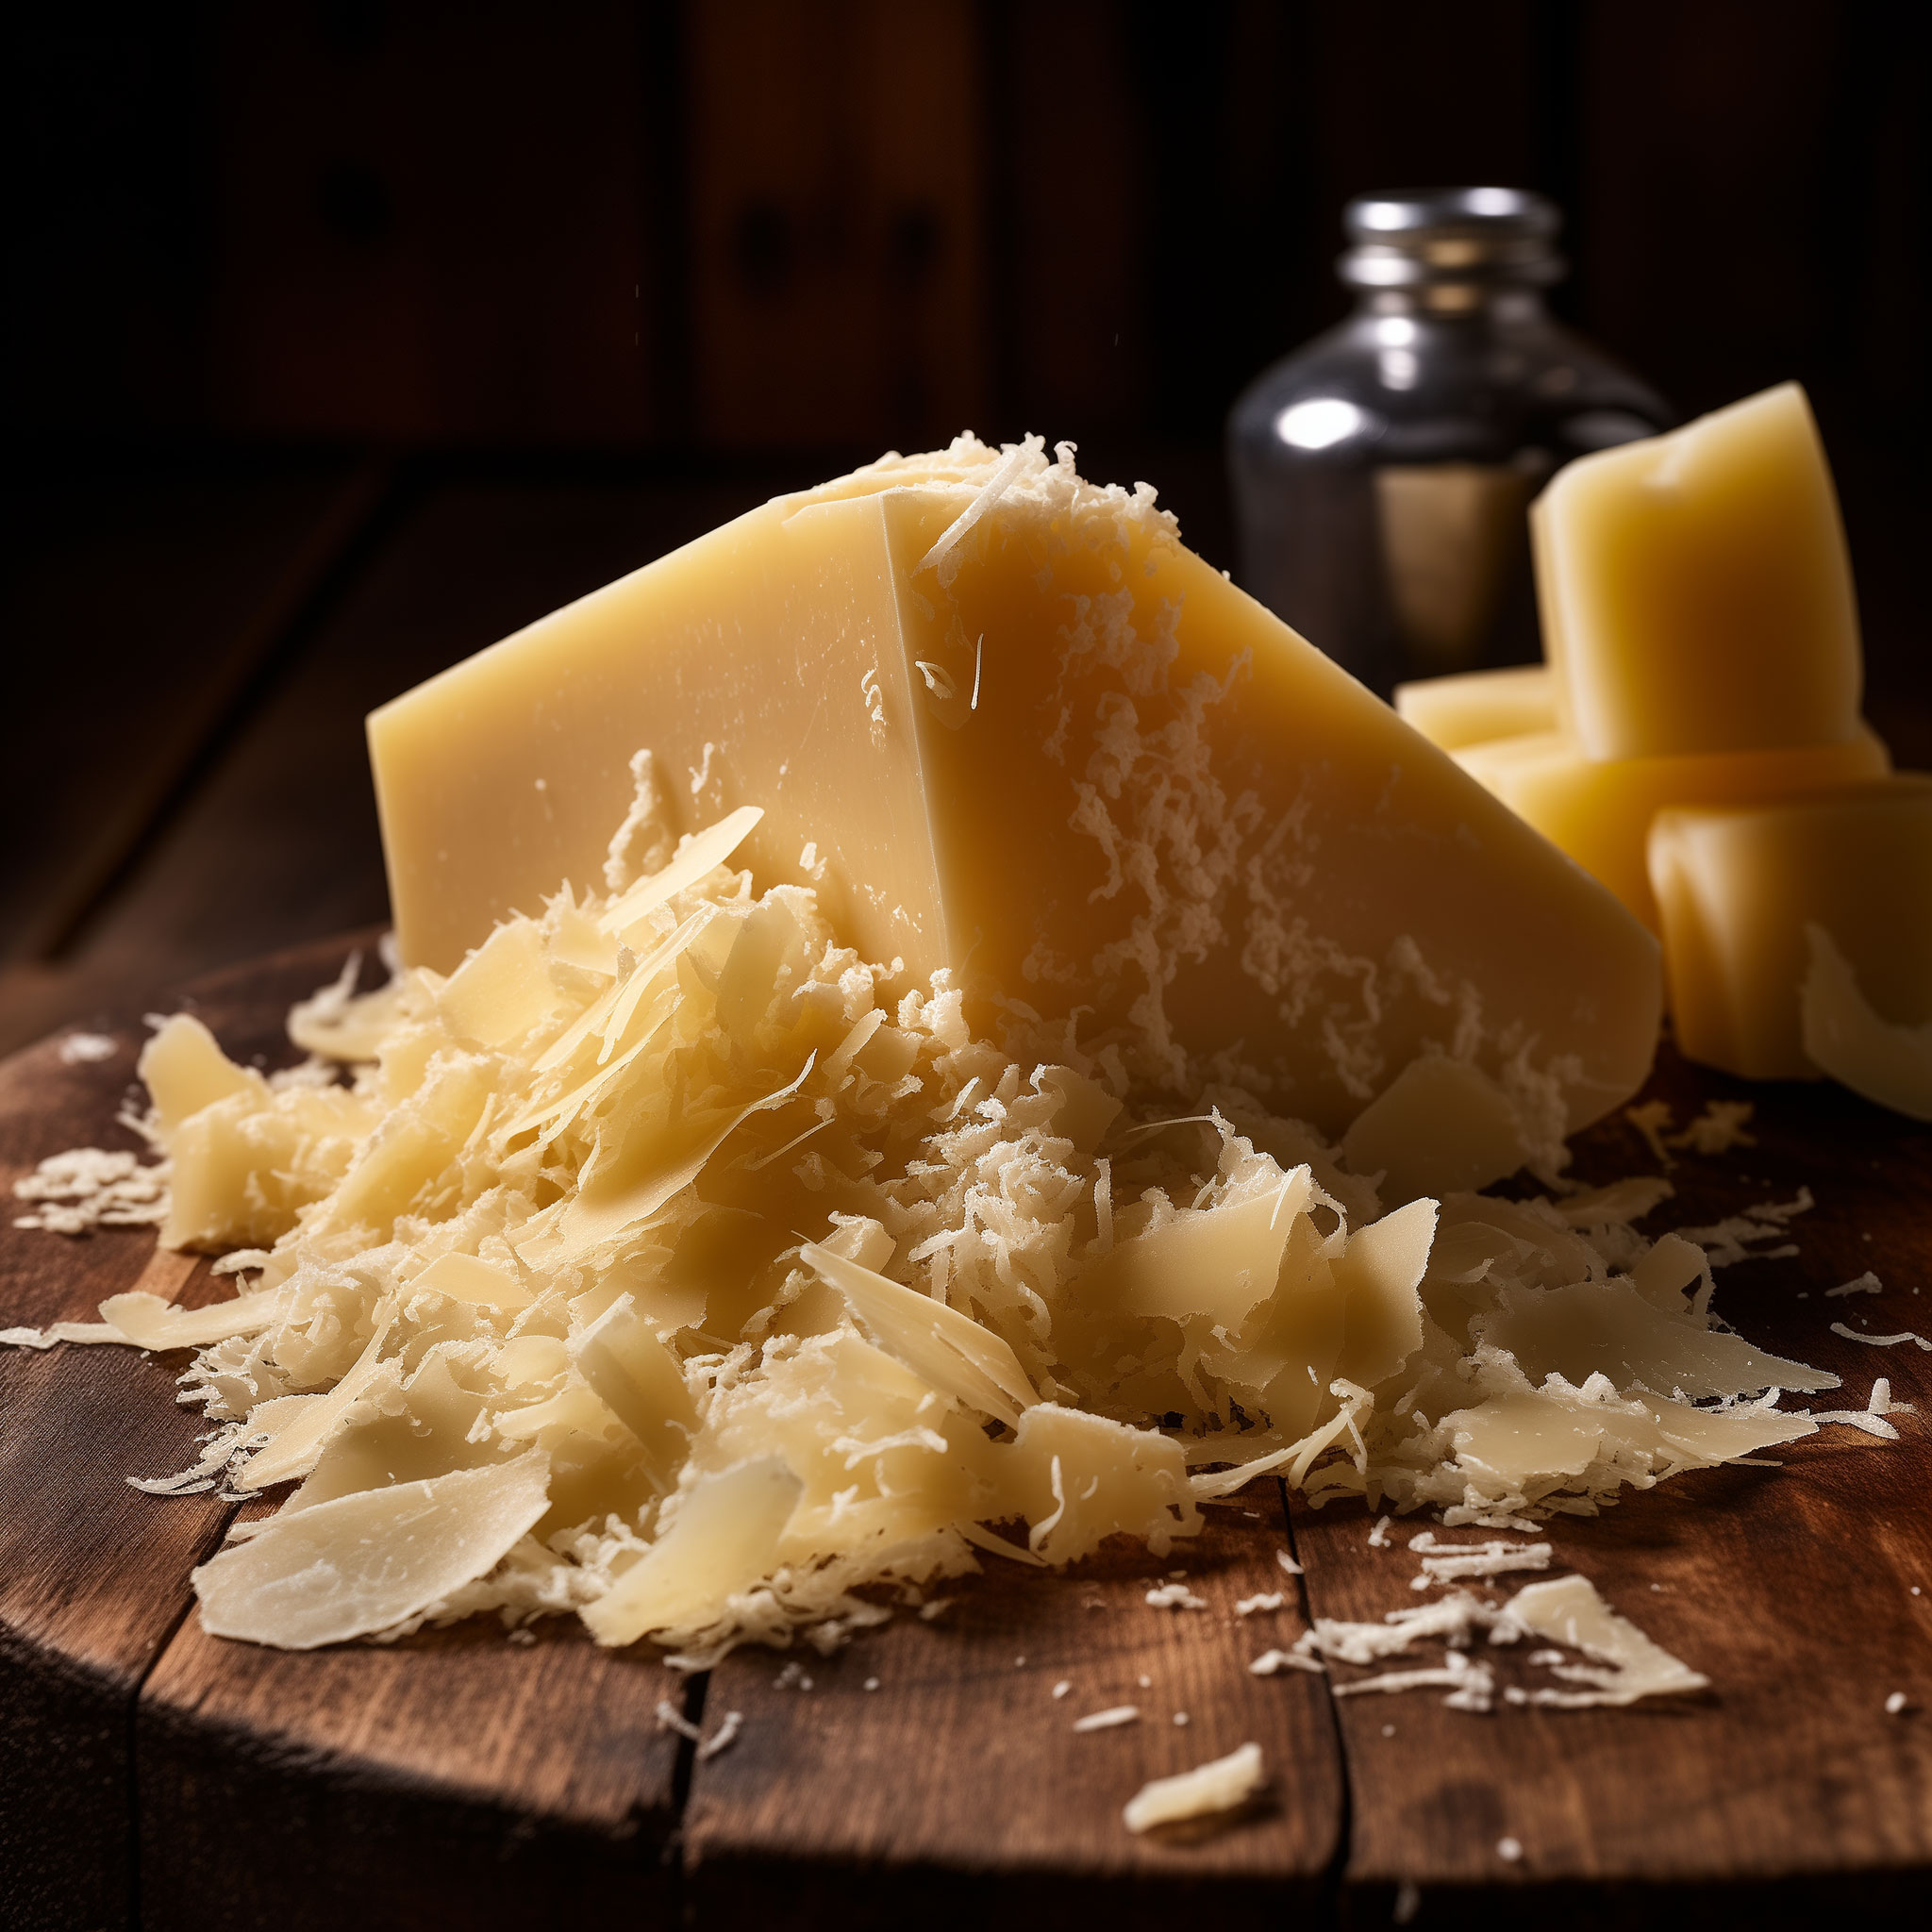 https://www.cheese.com/media/img/cheese/parmesan_on_wooden_surface.jpg